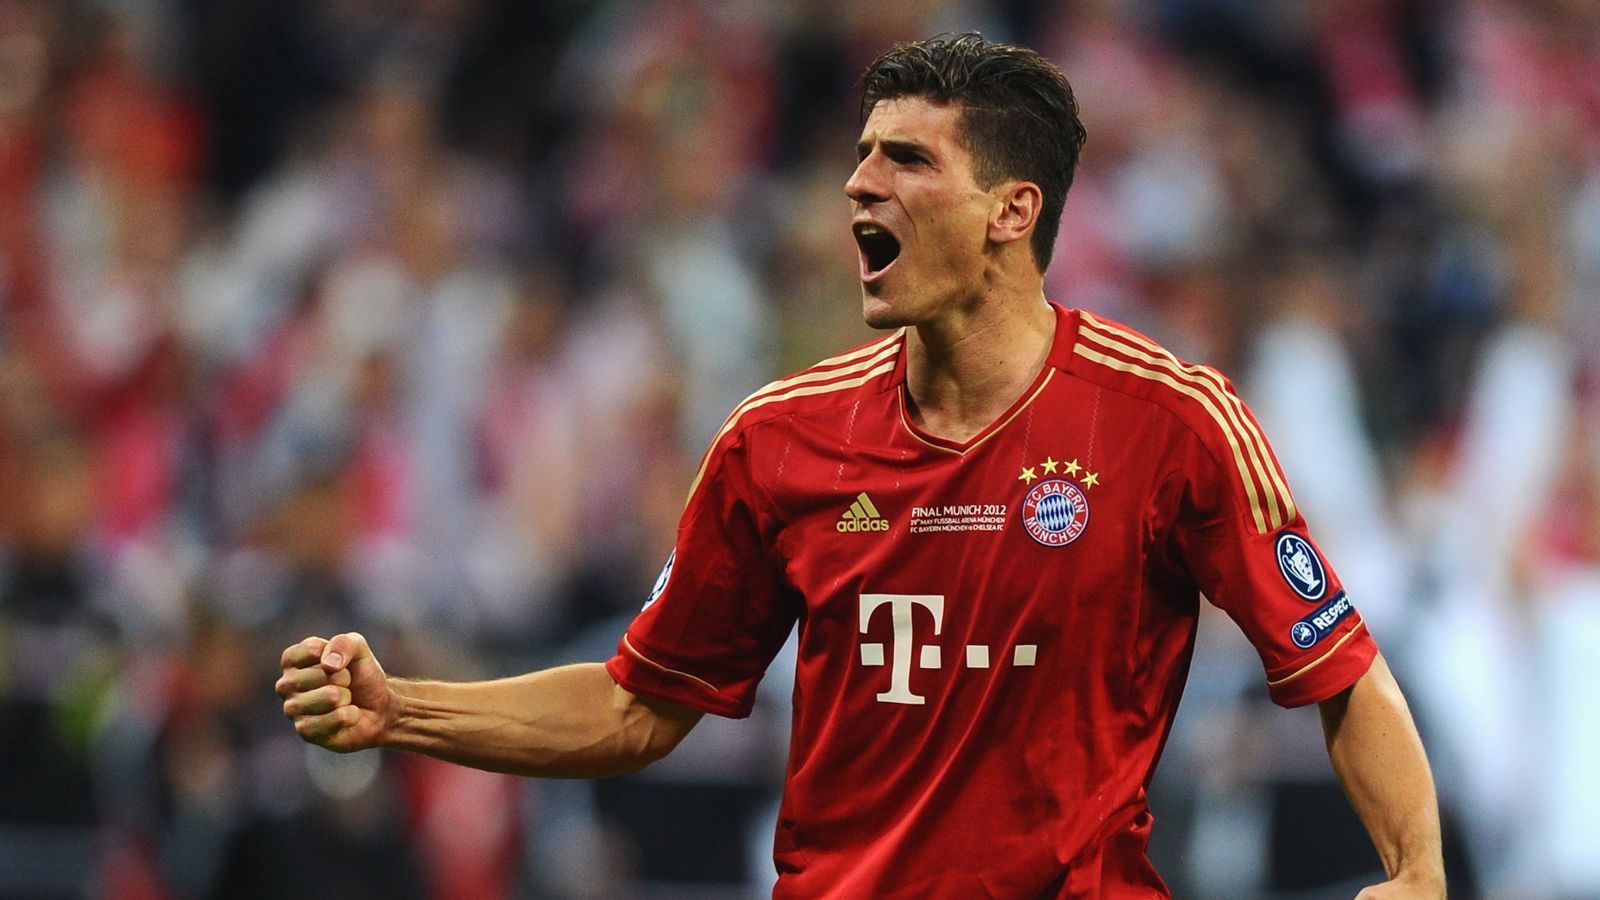 
                <strong>Mario Gomez</strong><br>
                Hattricks in der Champions League: 3
              